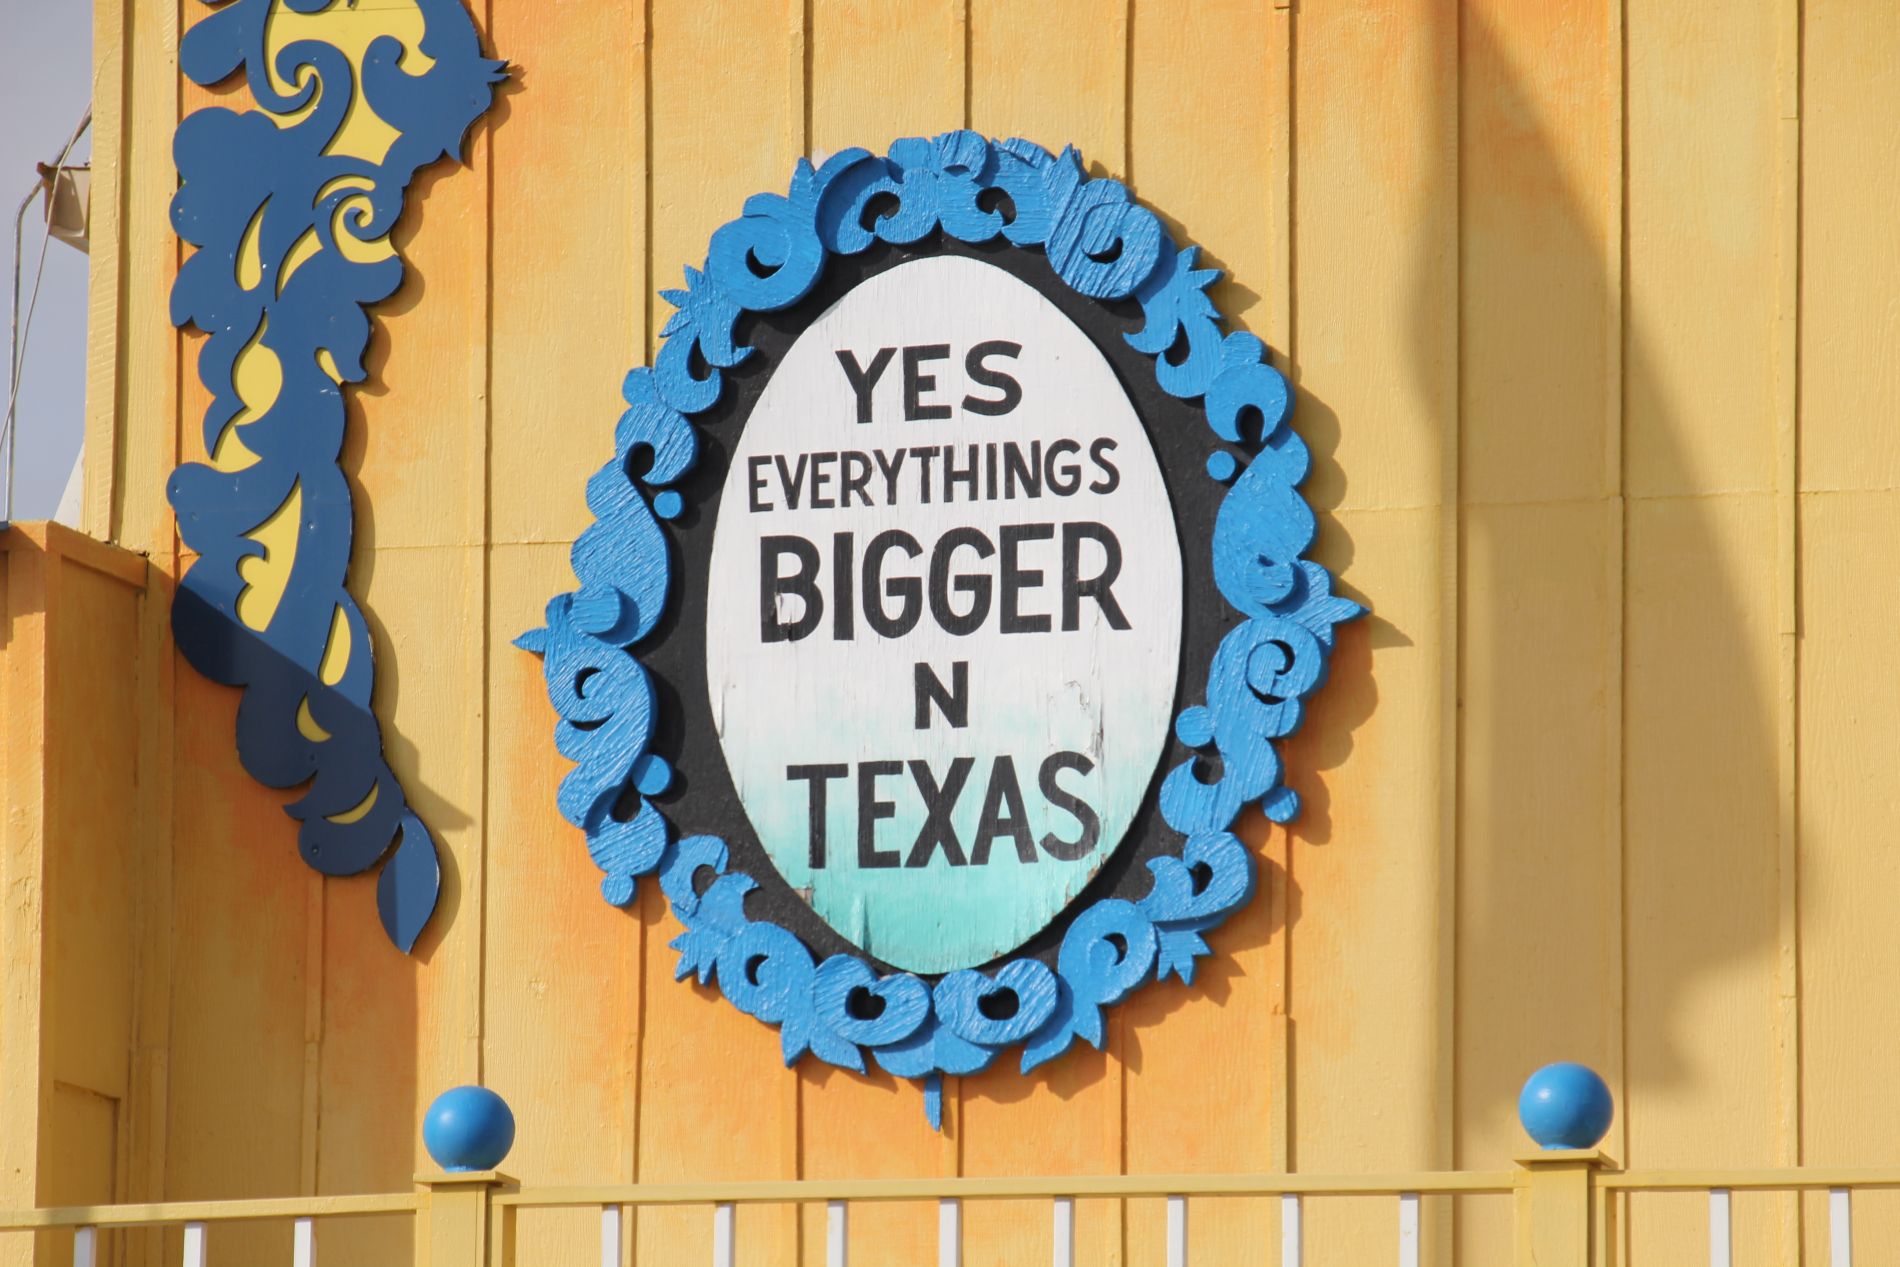 Yes Everythings Bigger N Texas sign in Amarillo, Texas